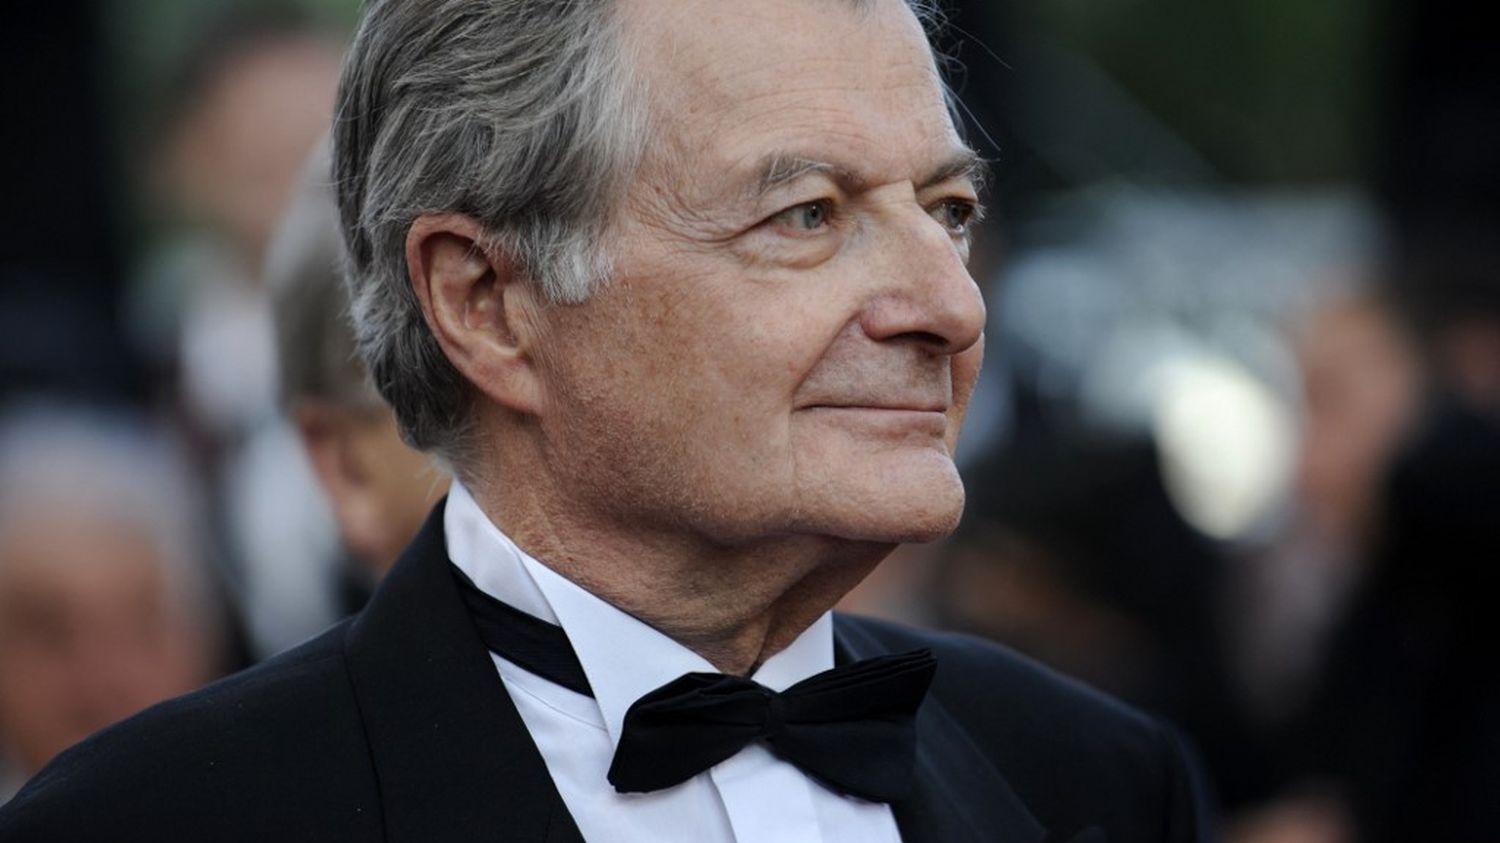 Cinema: death of actor Philippe Laudenbach at 88